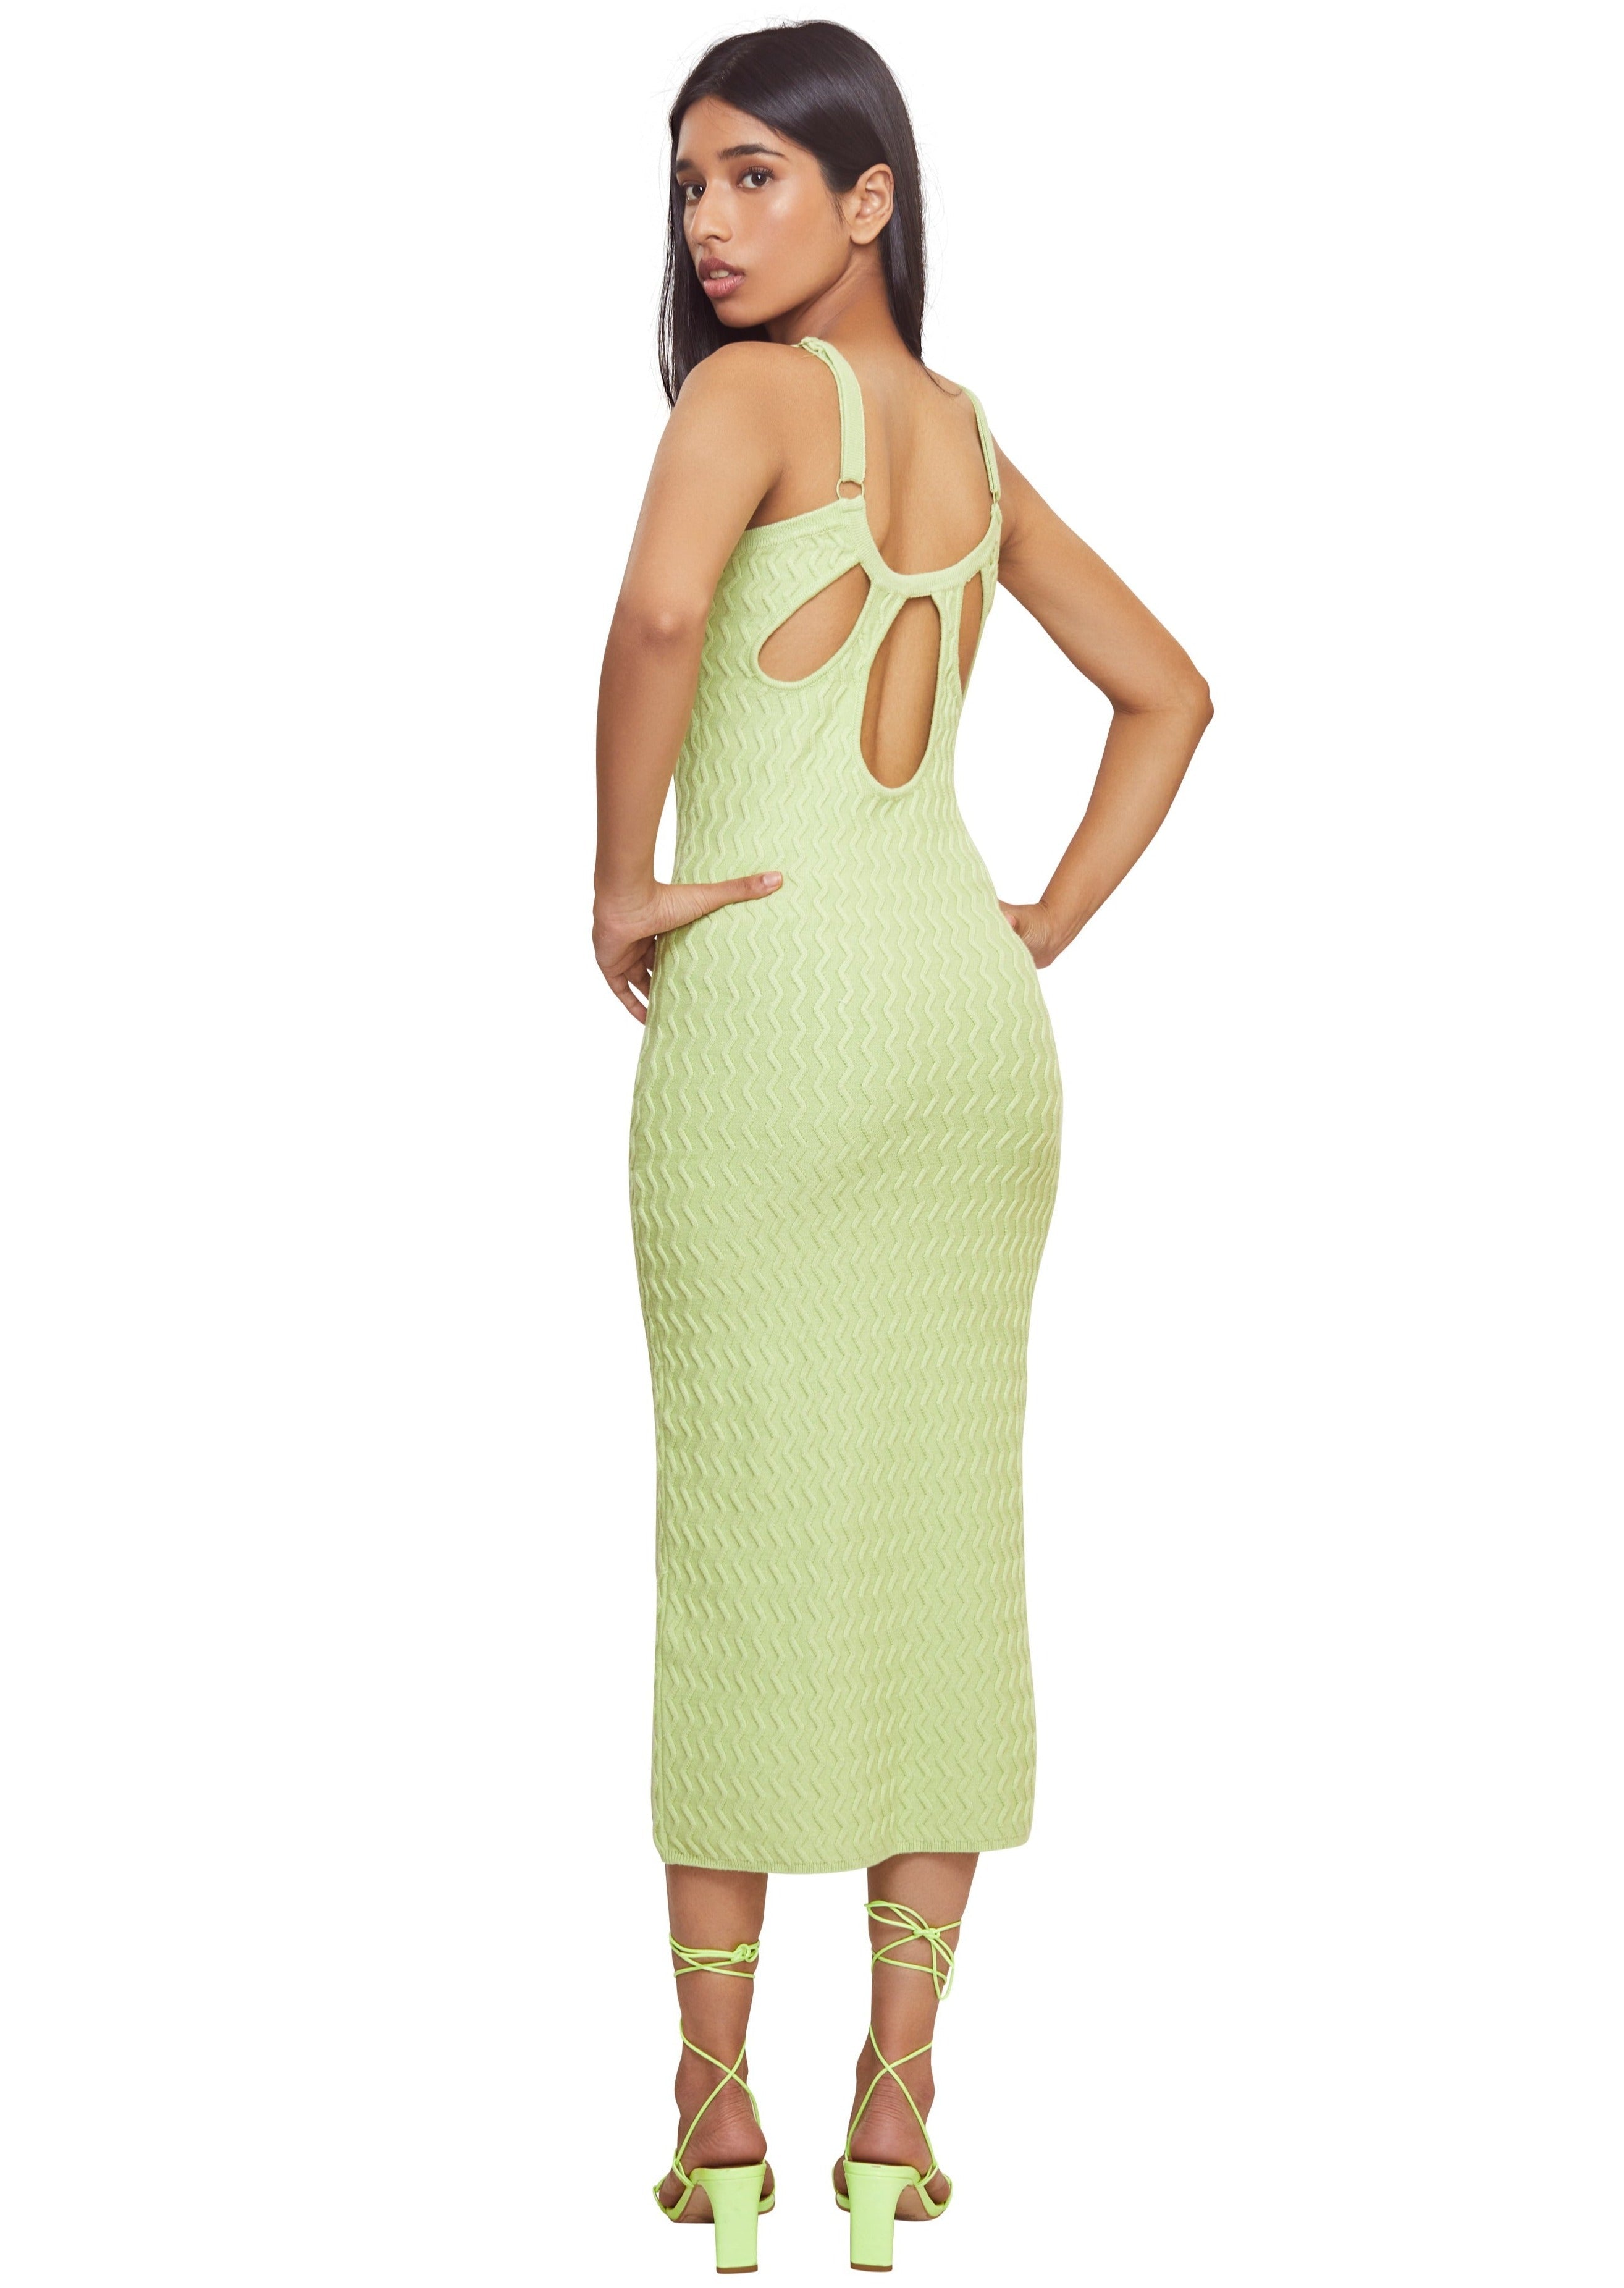 Mint classic hofs knitted slip dress shape w/ wavy rib from the brand House Of Sunny